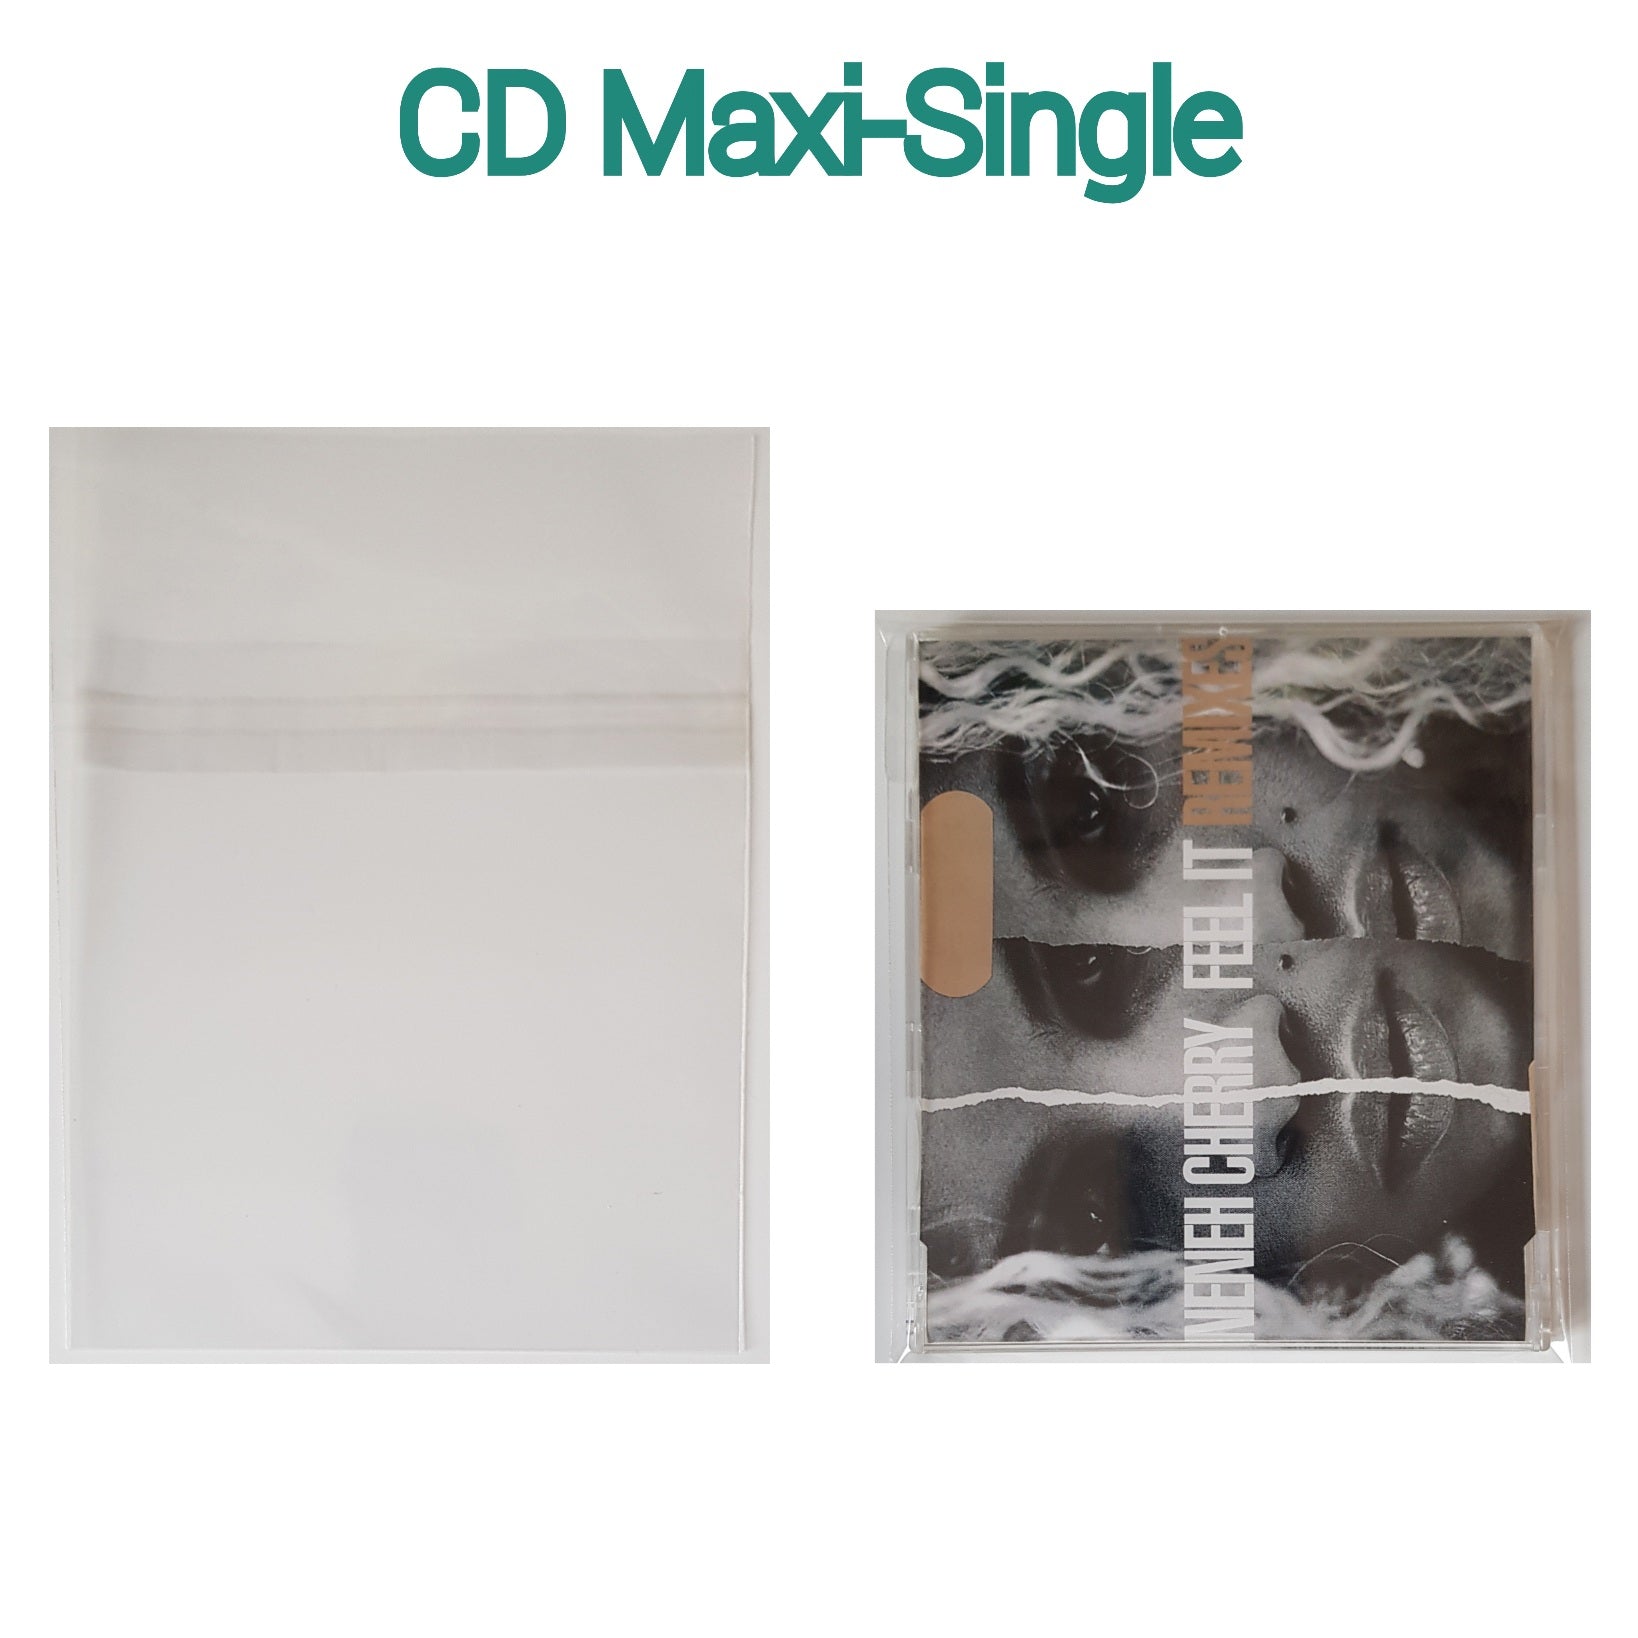 CD Maxi-Single Protective Resealable Sleeves 25-pack Made in Japan